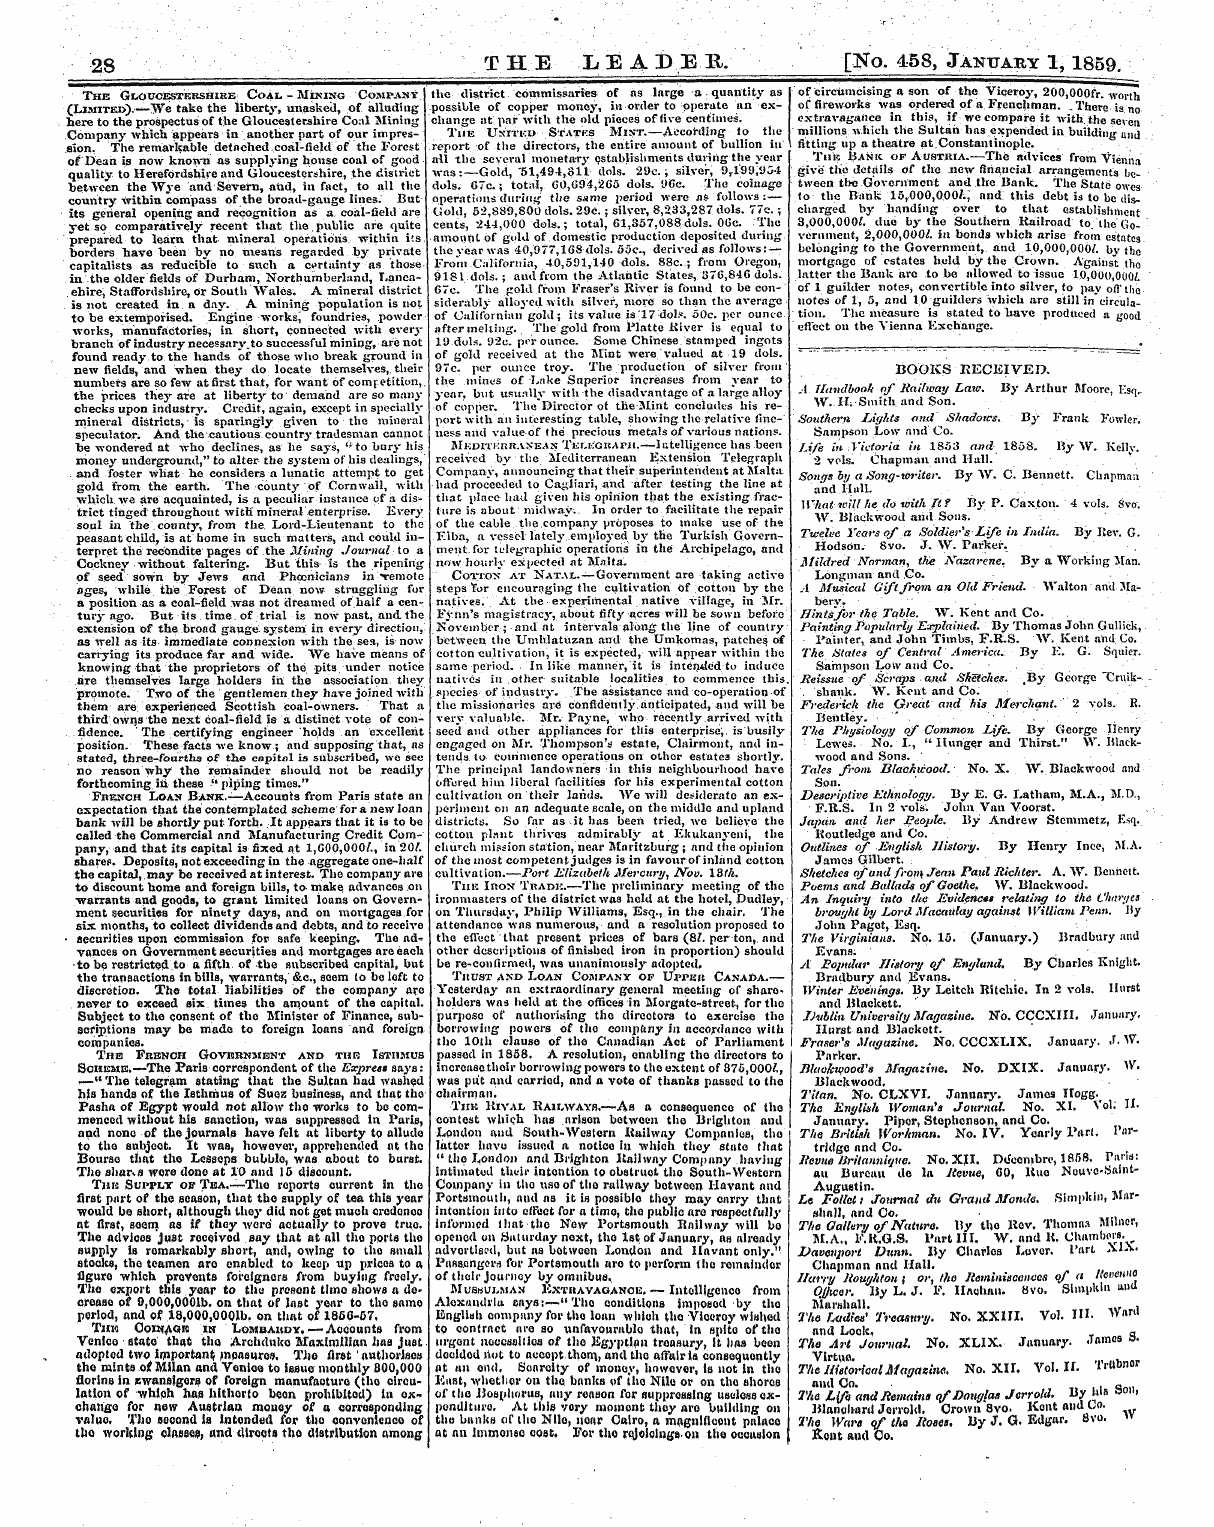 Leader (1850-1860): jS F Y, 2nd edition: 28